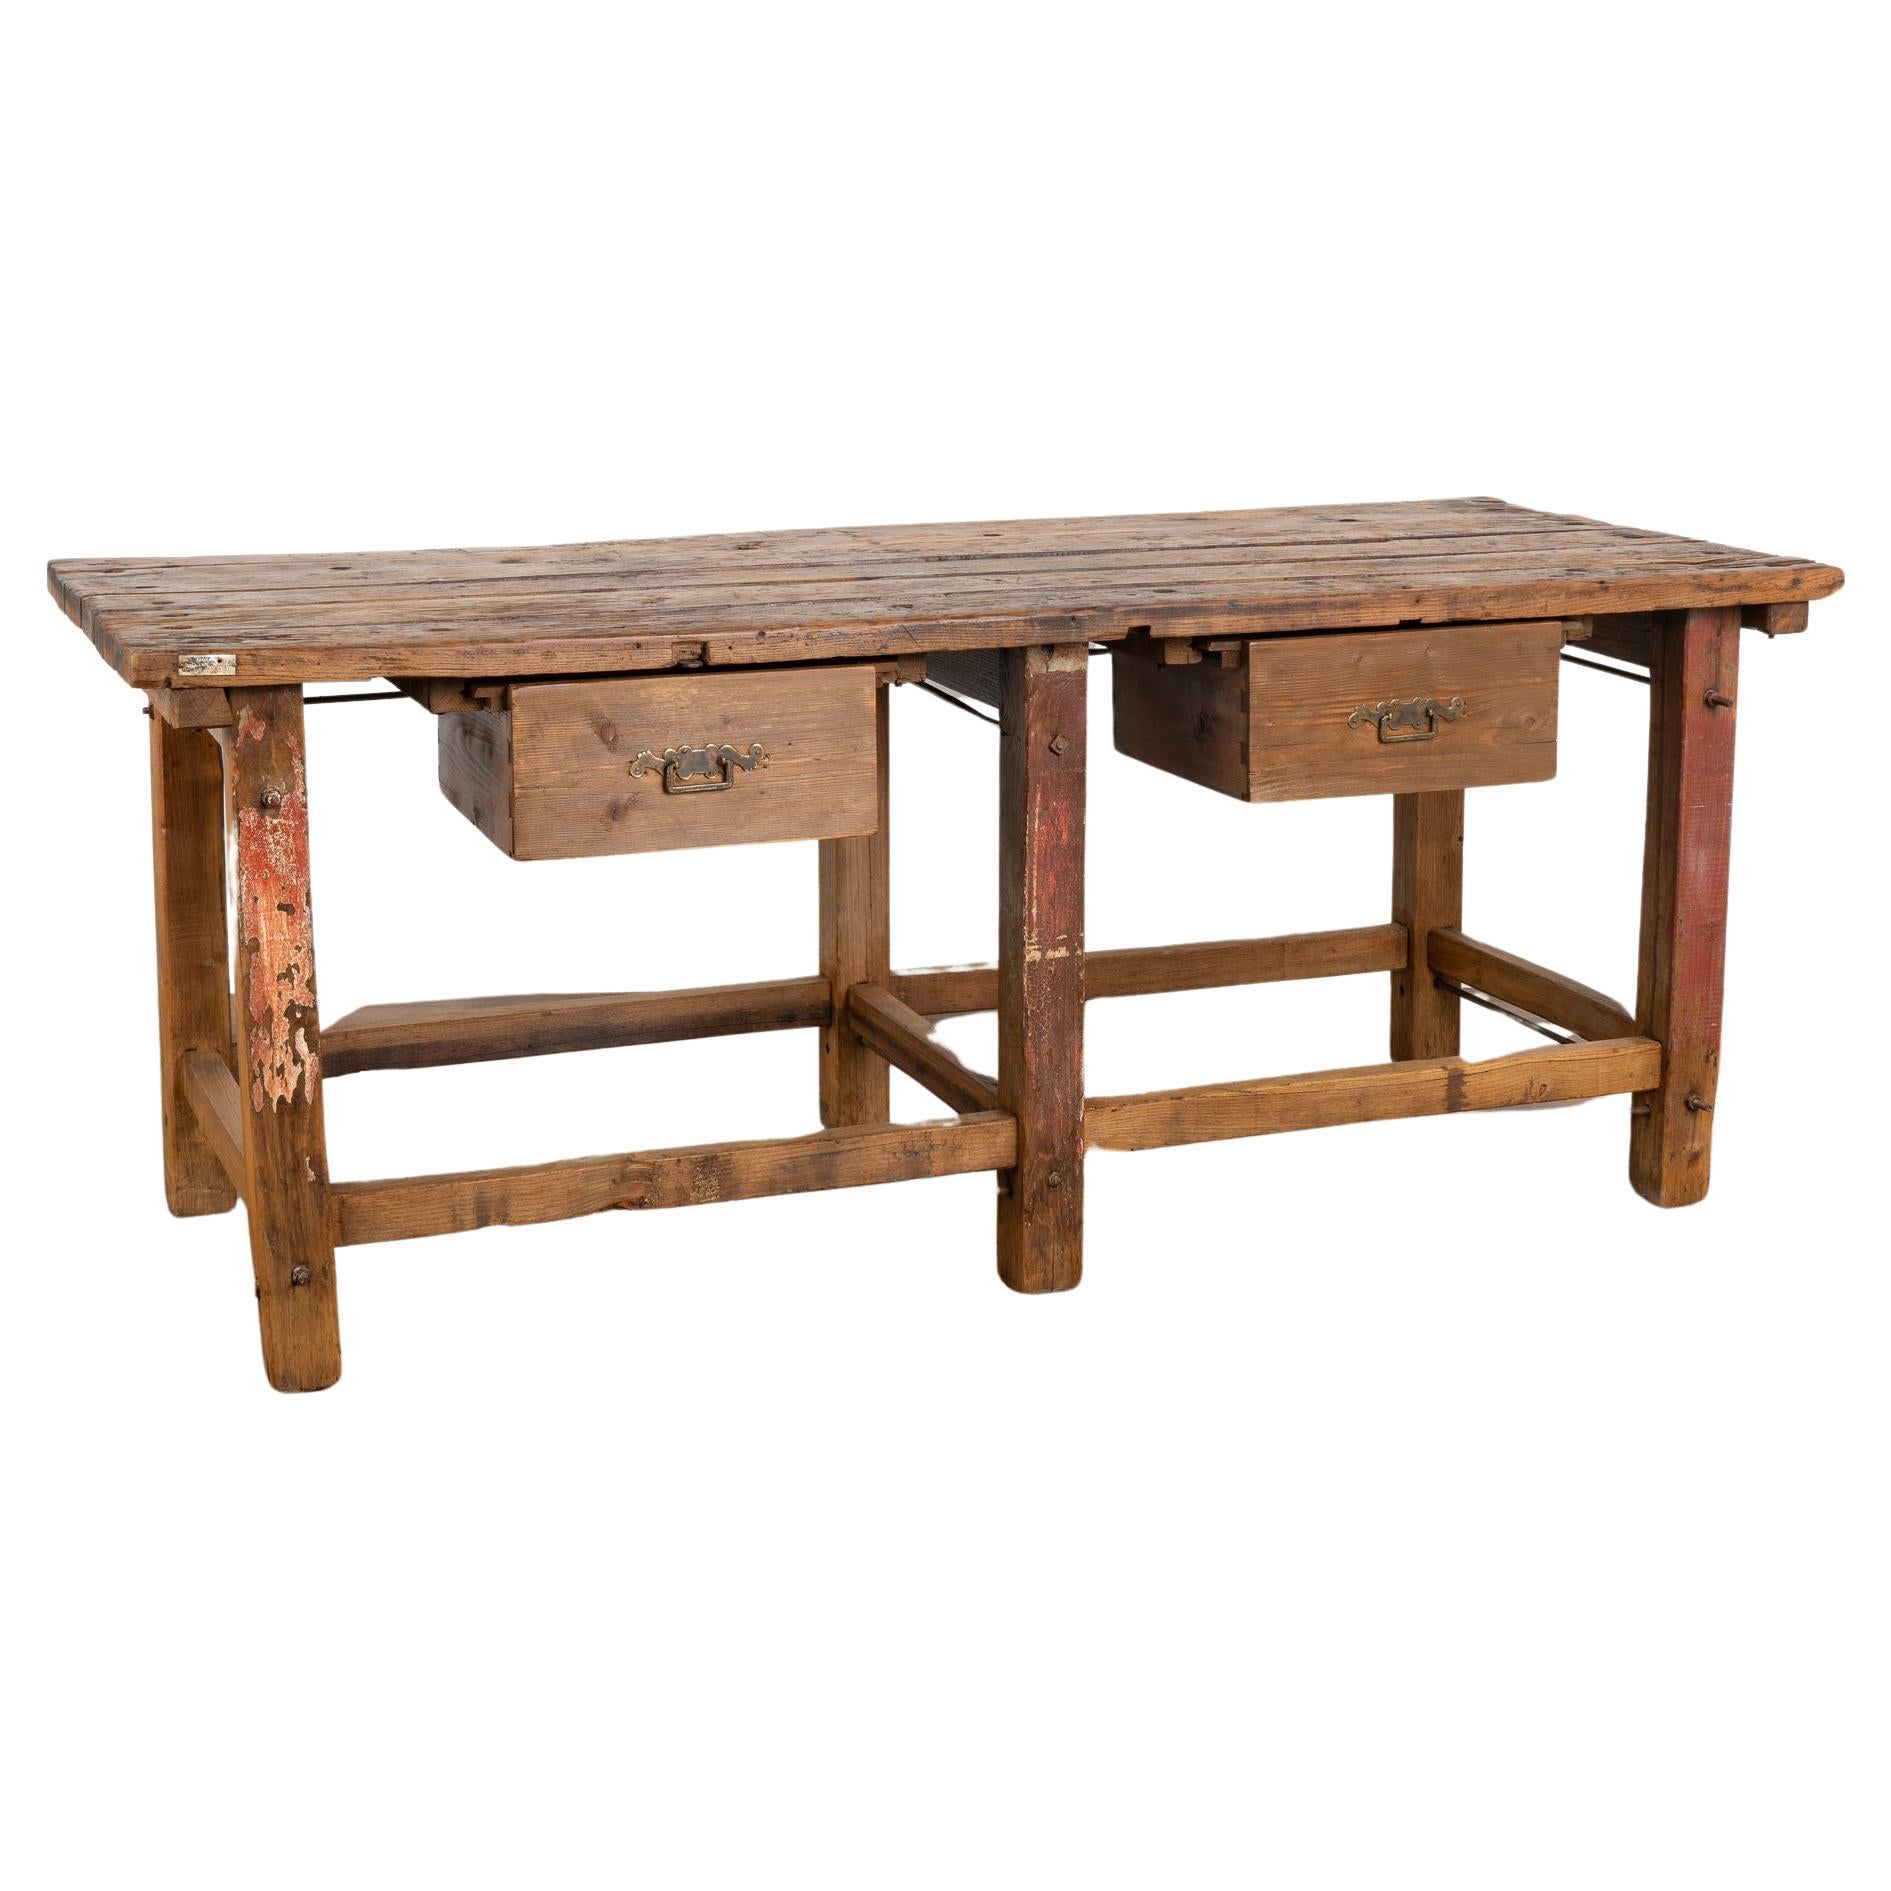 Antique Rustic Work Table With Two Drawers from Hungary circa 1880 For Sale